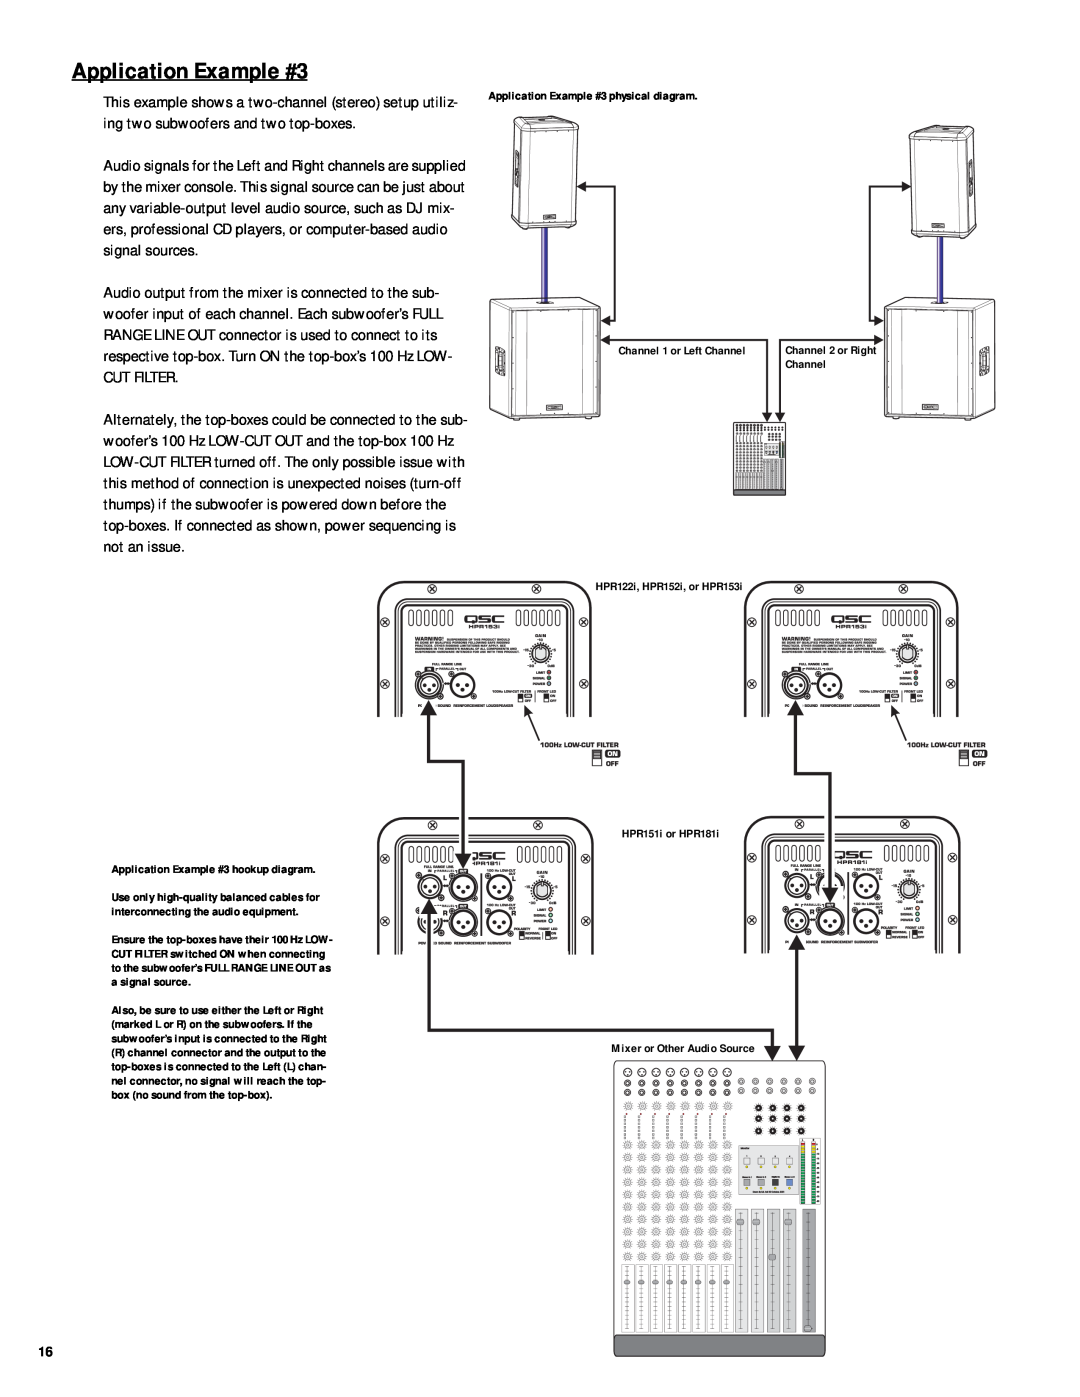 QSC Audio HPR122i, HPR152i, HPR153i, HPR151i, HPR181i user manual Application Example #3, Cut Filter 